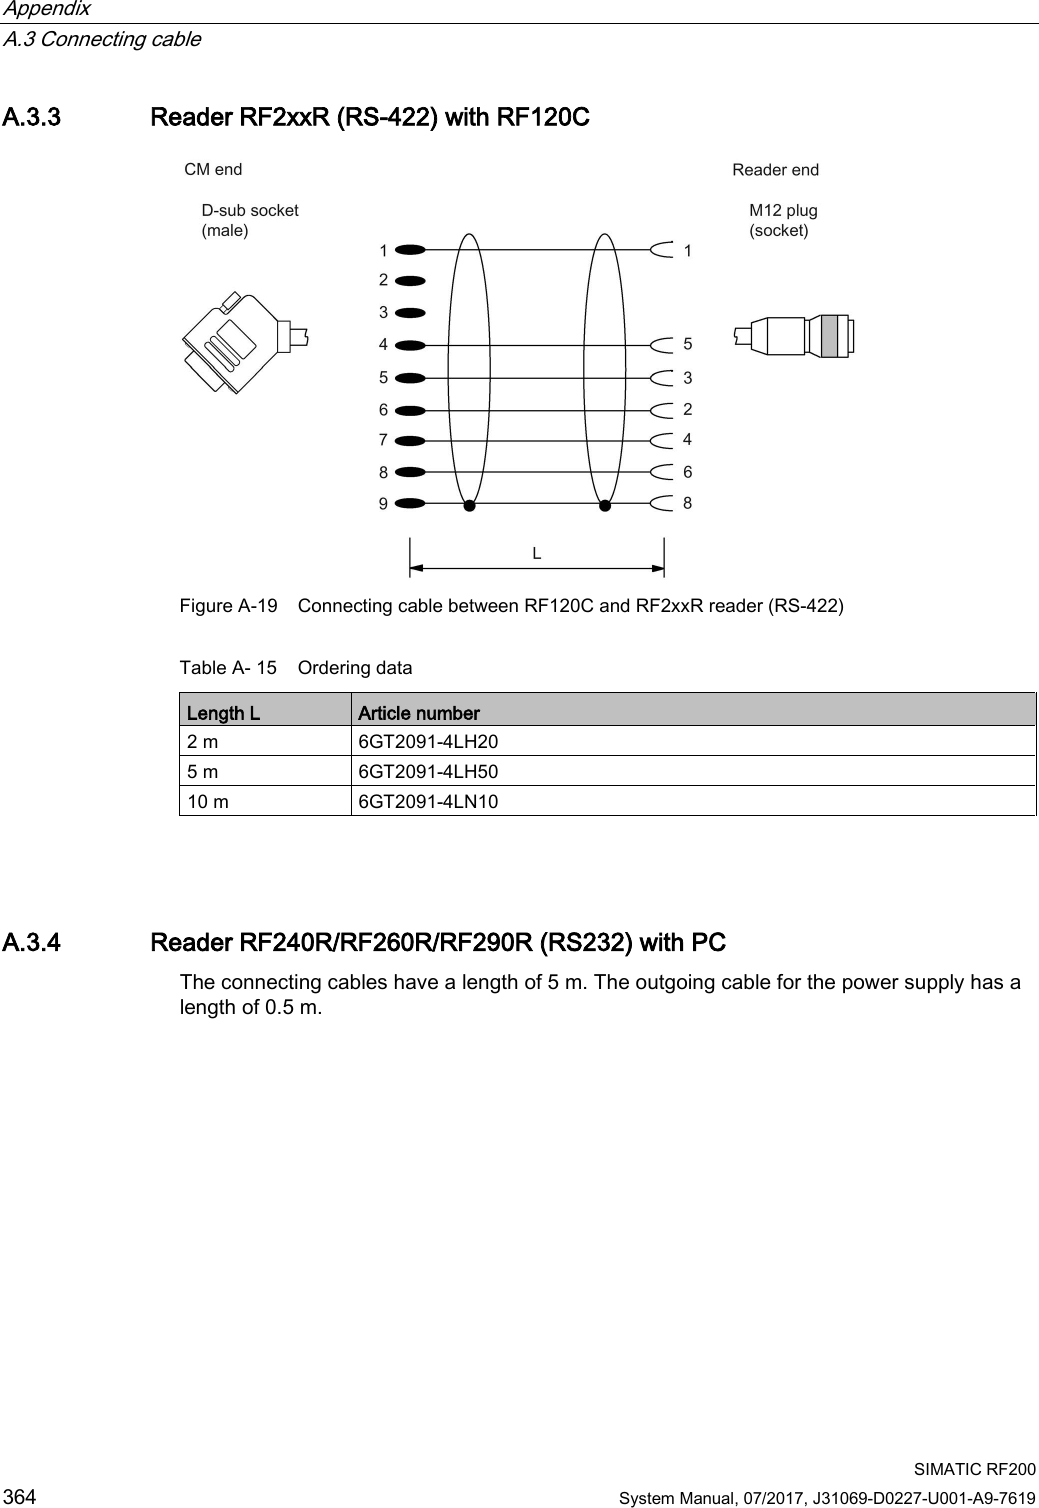 Appendix   A.3 Connecting cable  SIMATIC RF200 364 System Manual, 07/2017, J31069-D0227-U001-A9-7619 A.3.3 Reader RF2xxR (RS-422) with RF120C  Figure A-19 Connecting cable between RF120C and RF2xxR reader (RS-422) Table A- 15 Ordering data Length L Article number 2 m 6GT2091-4LH20  5 m 6GT2091-4LH50  10 m 6GT2091-4LN10    A.3.4 Reader RF240R/RF260R/RF290R (RS232) with PC The connecting cables have a length of 5 m. The outgoing cable for the power supply has a length of 0.5 m. 